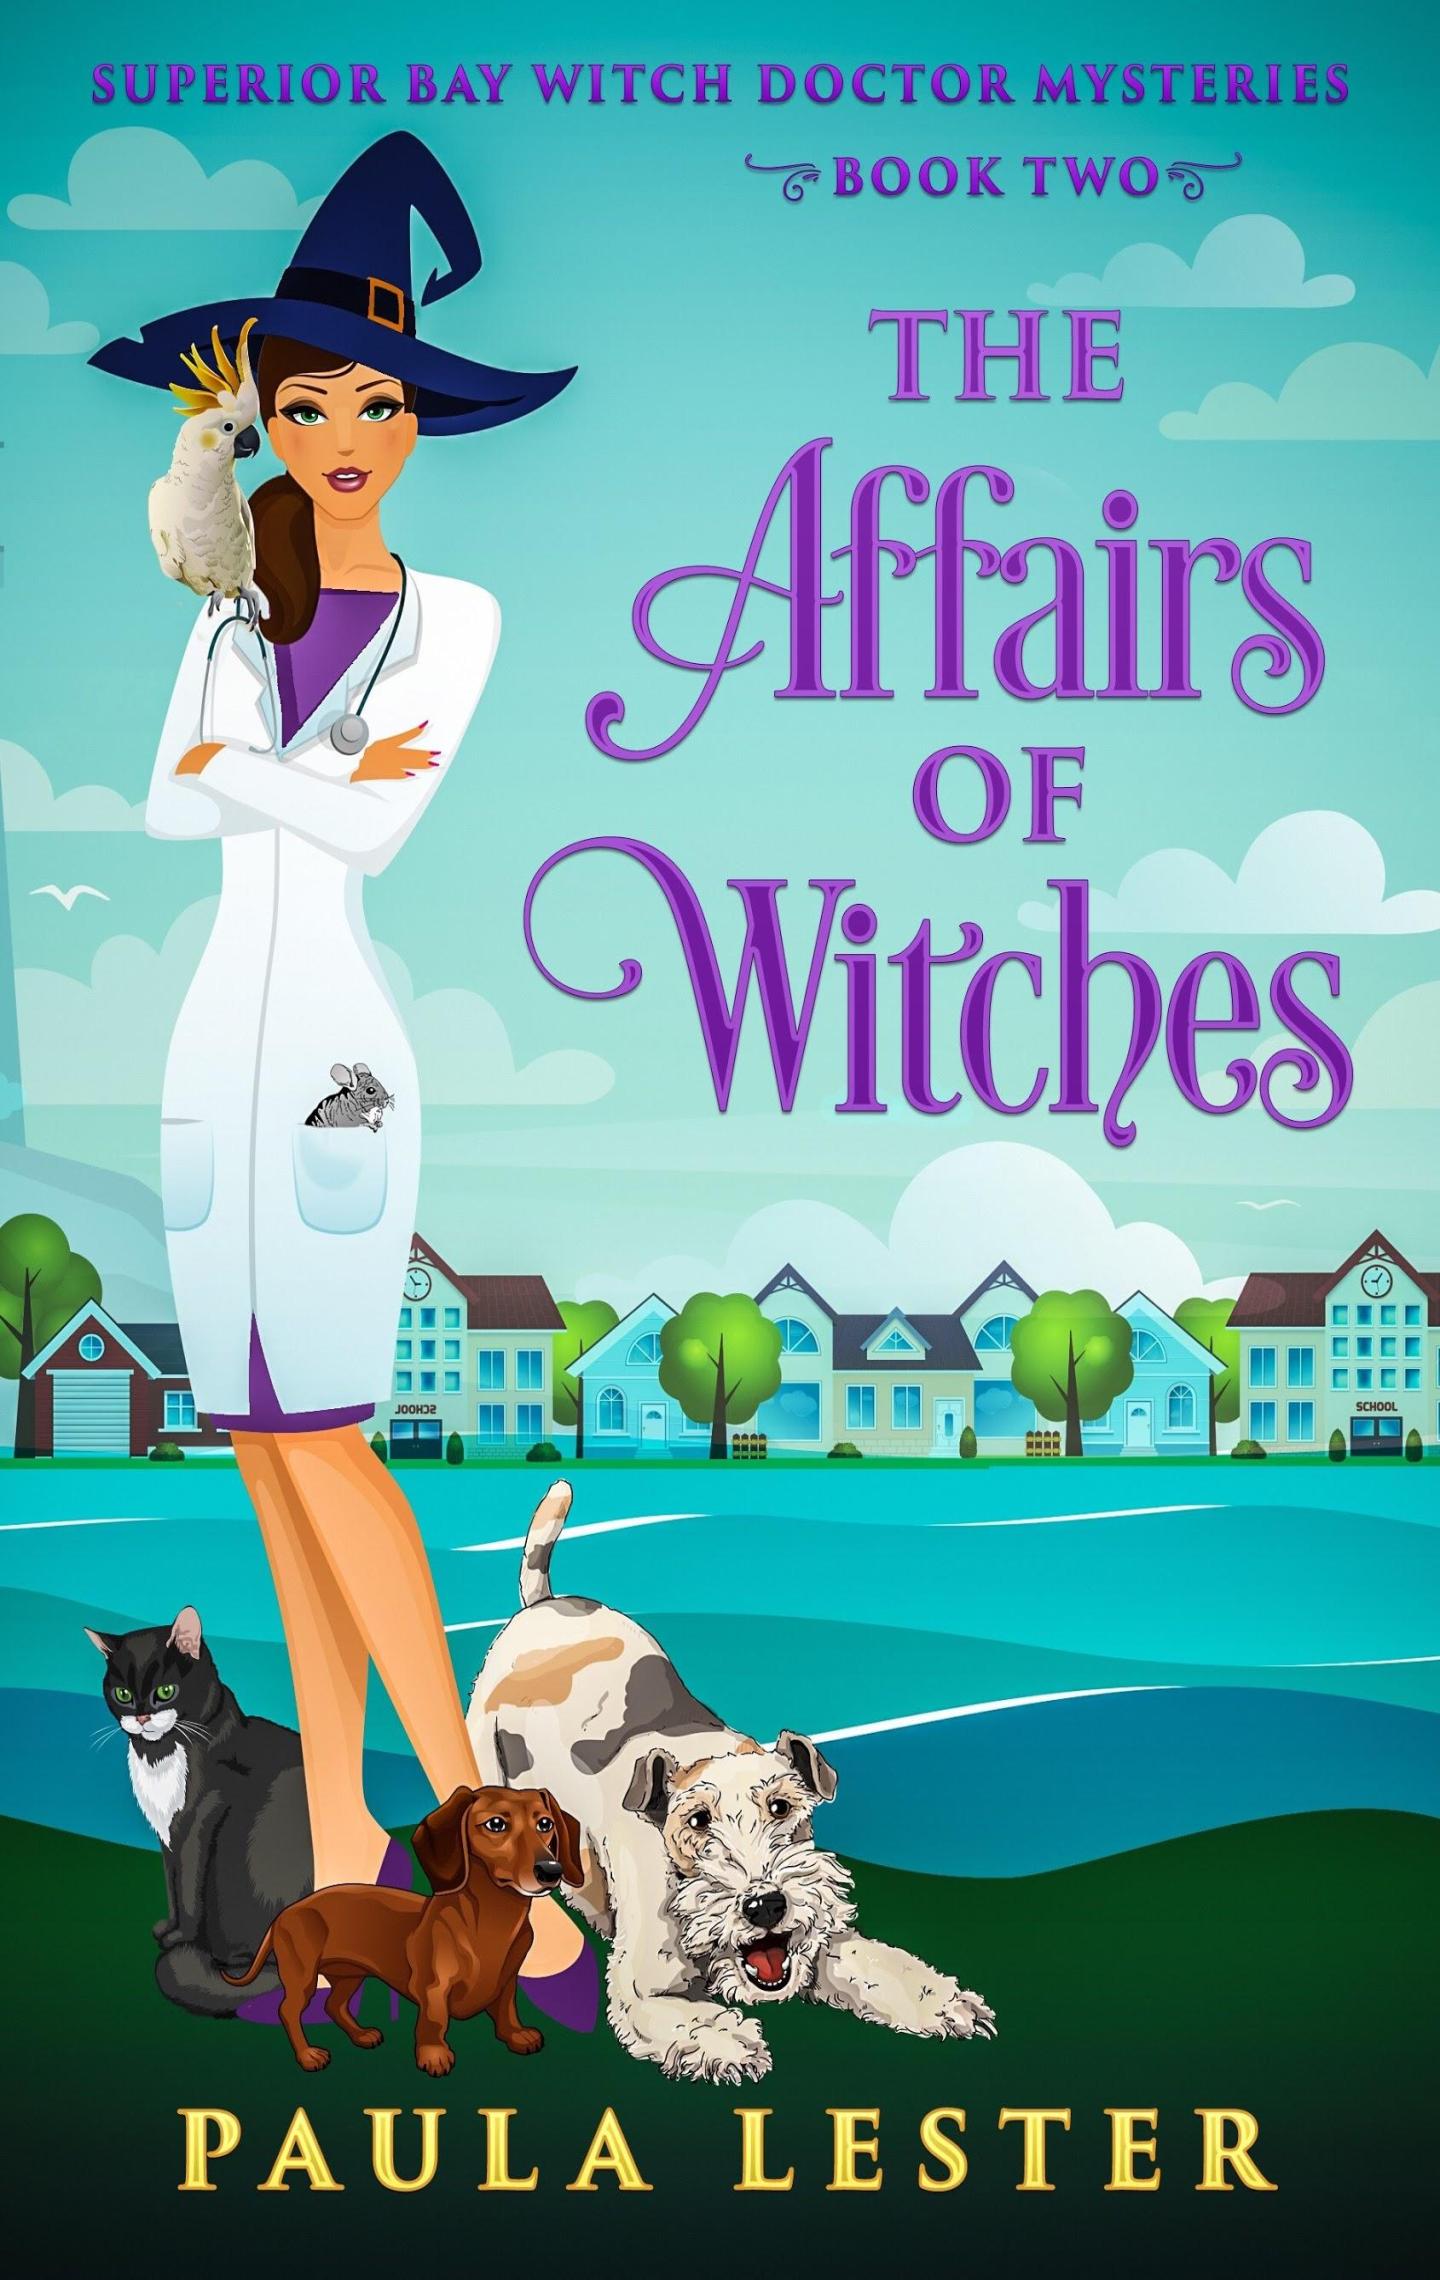 The Affairs of Witches